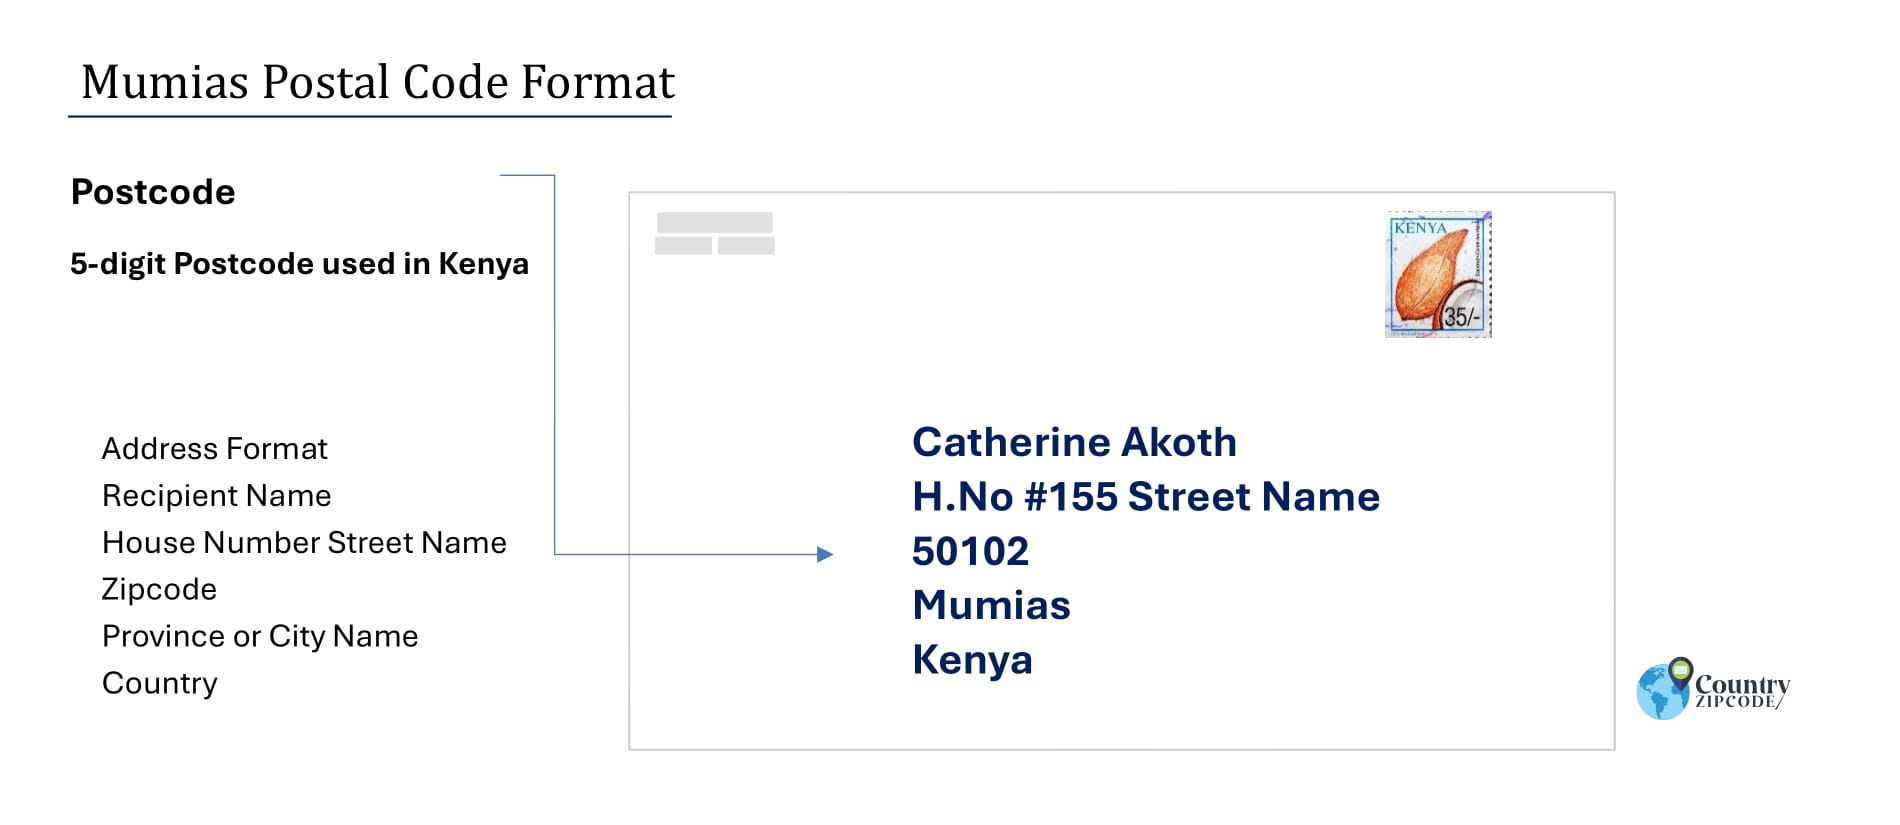 Example of Mumias Address and postal code format